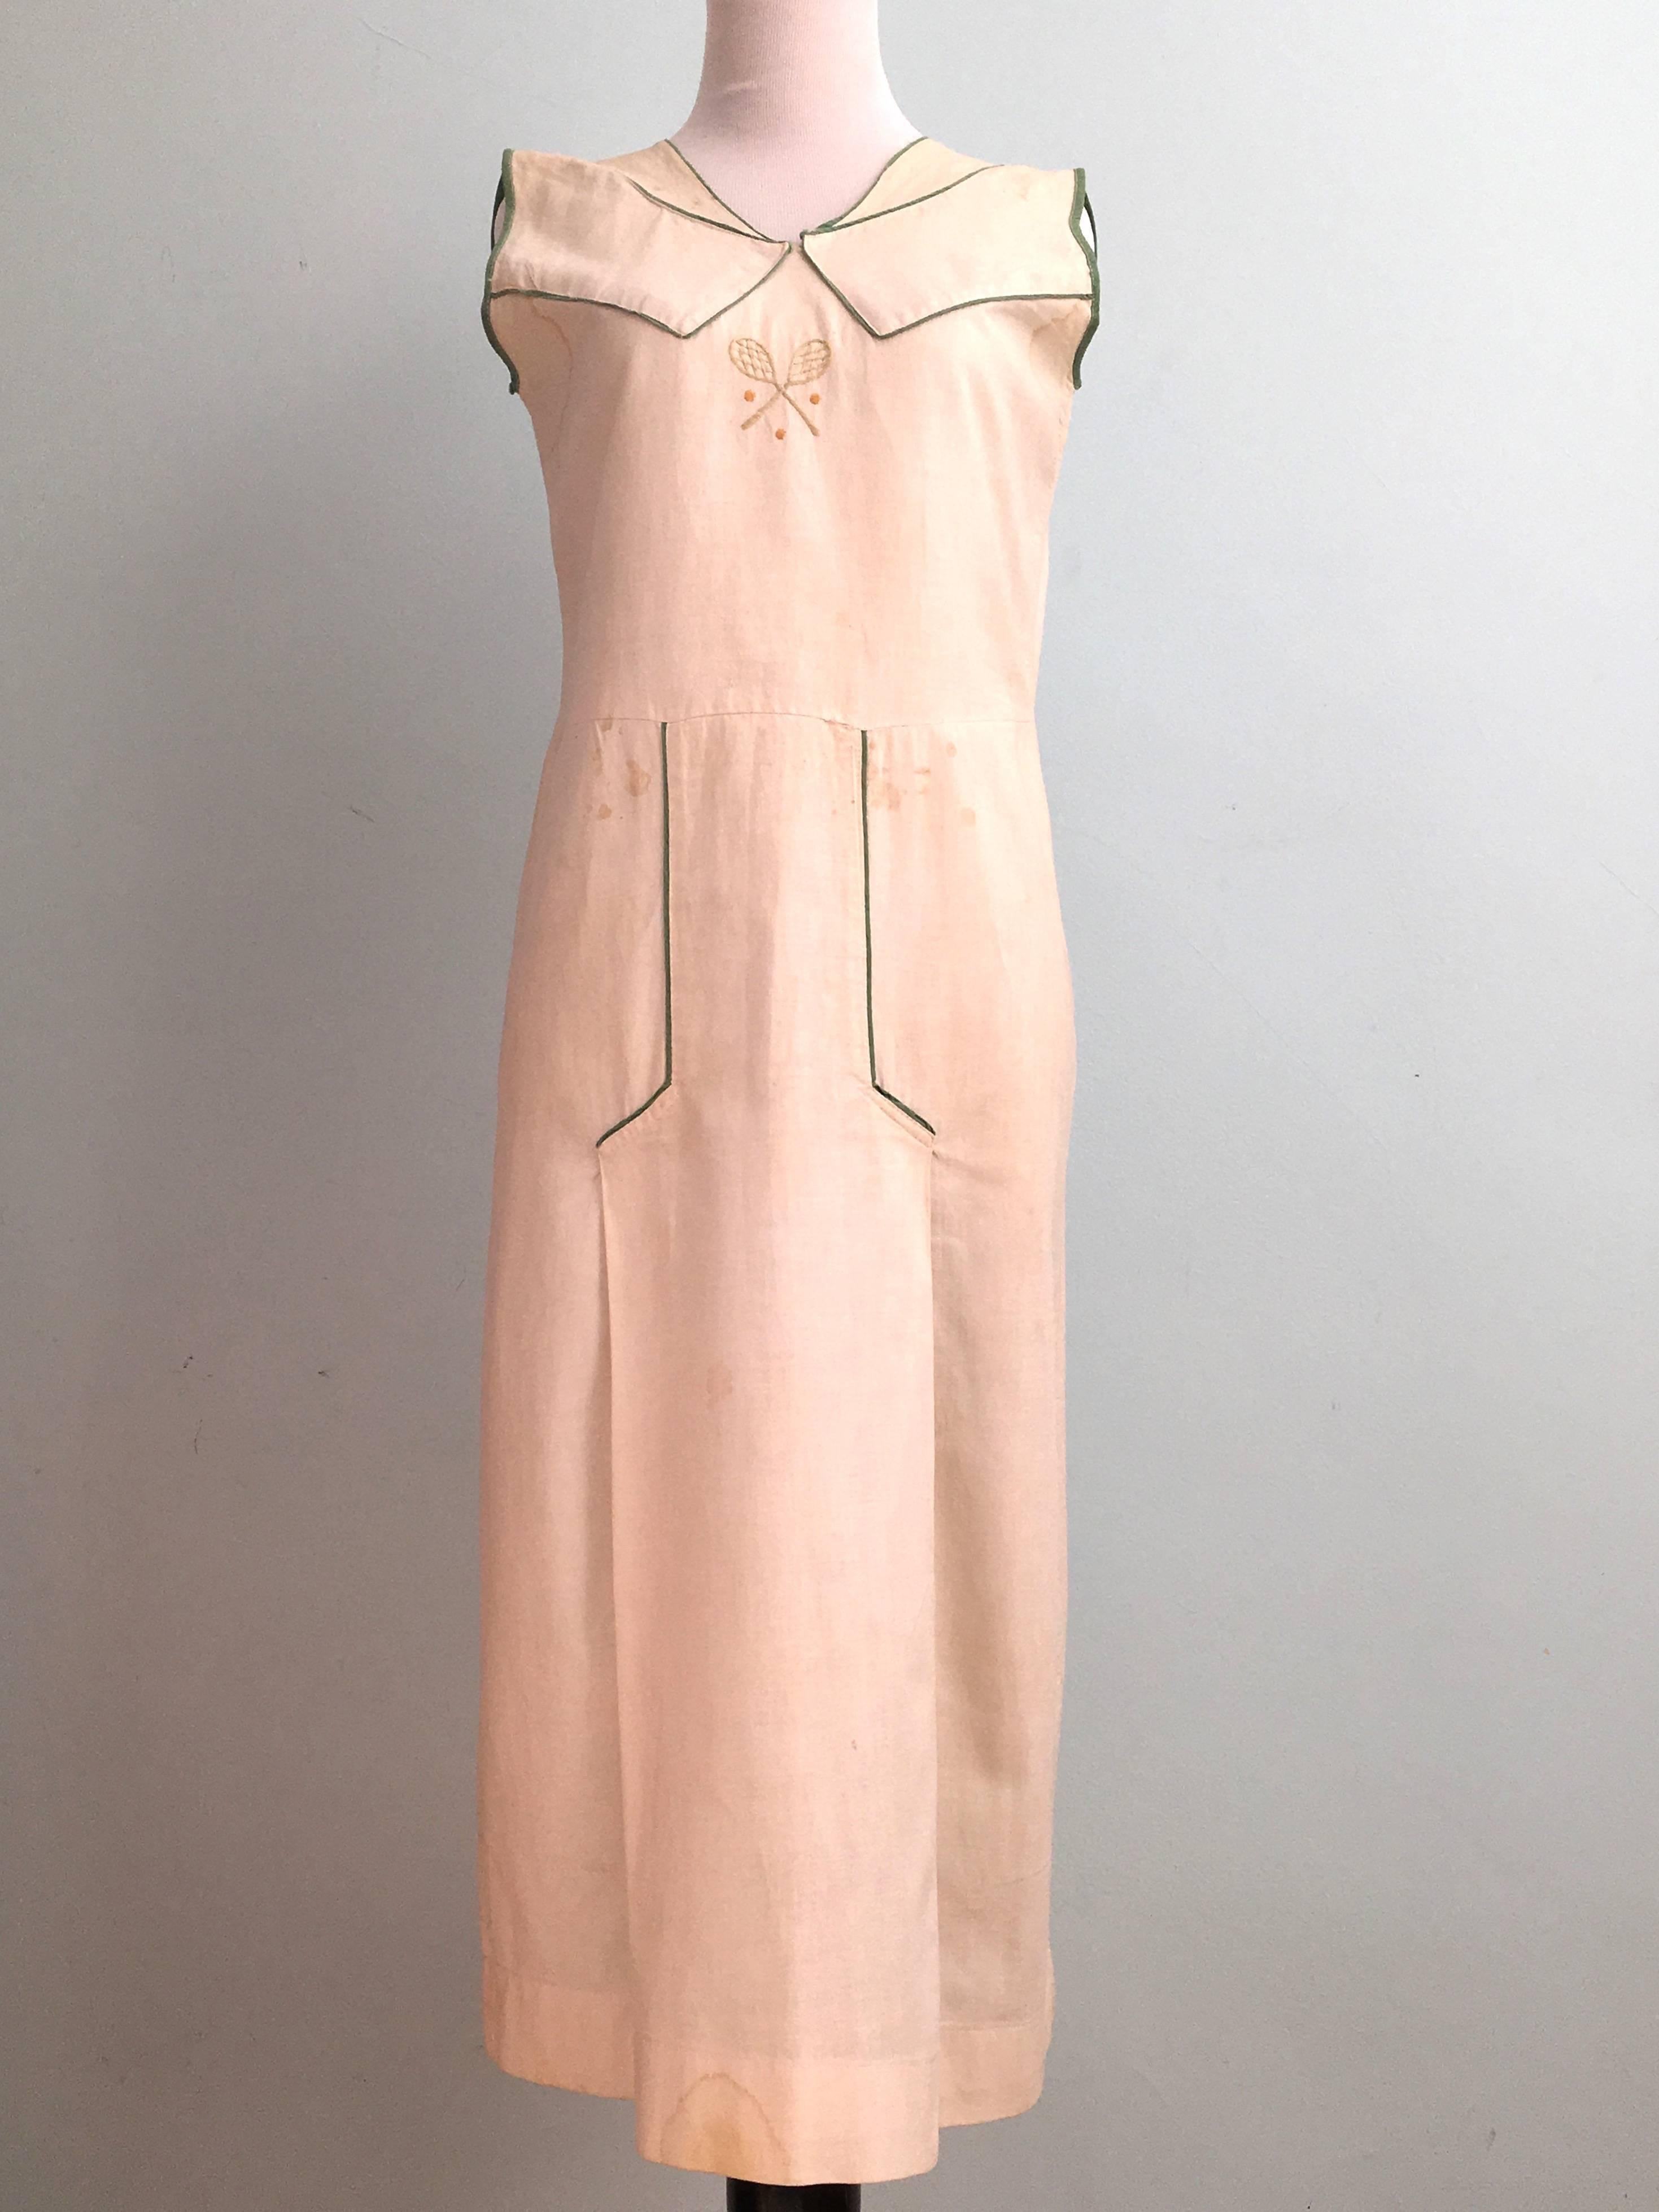 This is a rare tennis dress from the 1920s. Such a fabulous piece! It is made of a white cotton material that is  trimmed with green fabric and embroidered at the center front with two rackets and three balls. The silhouette of the dress is that of